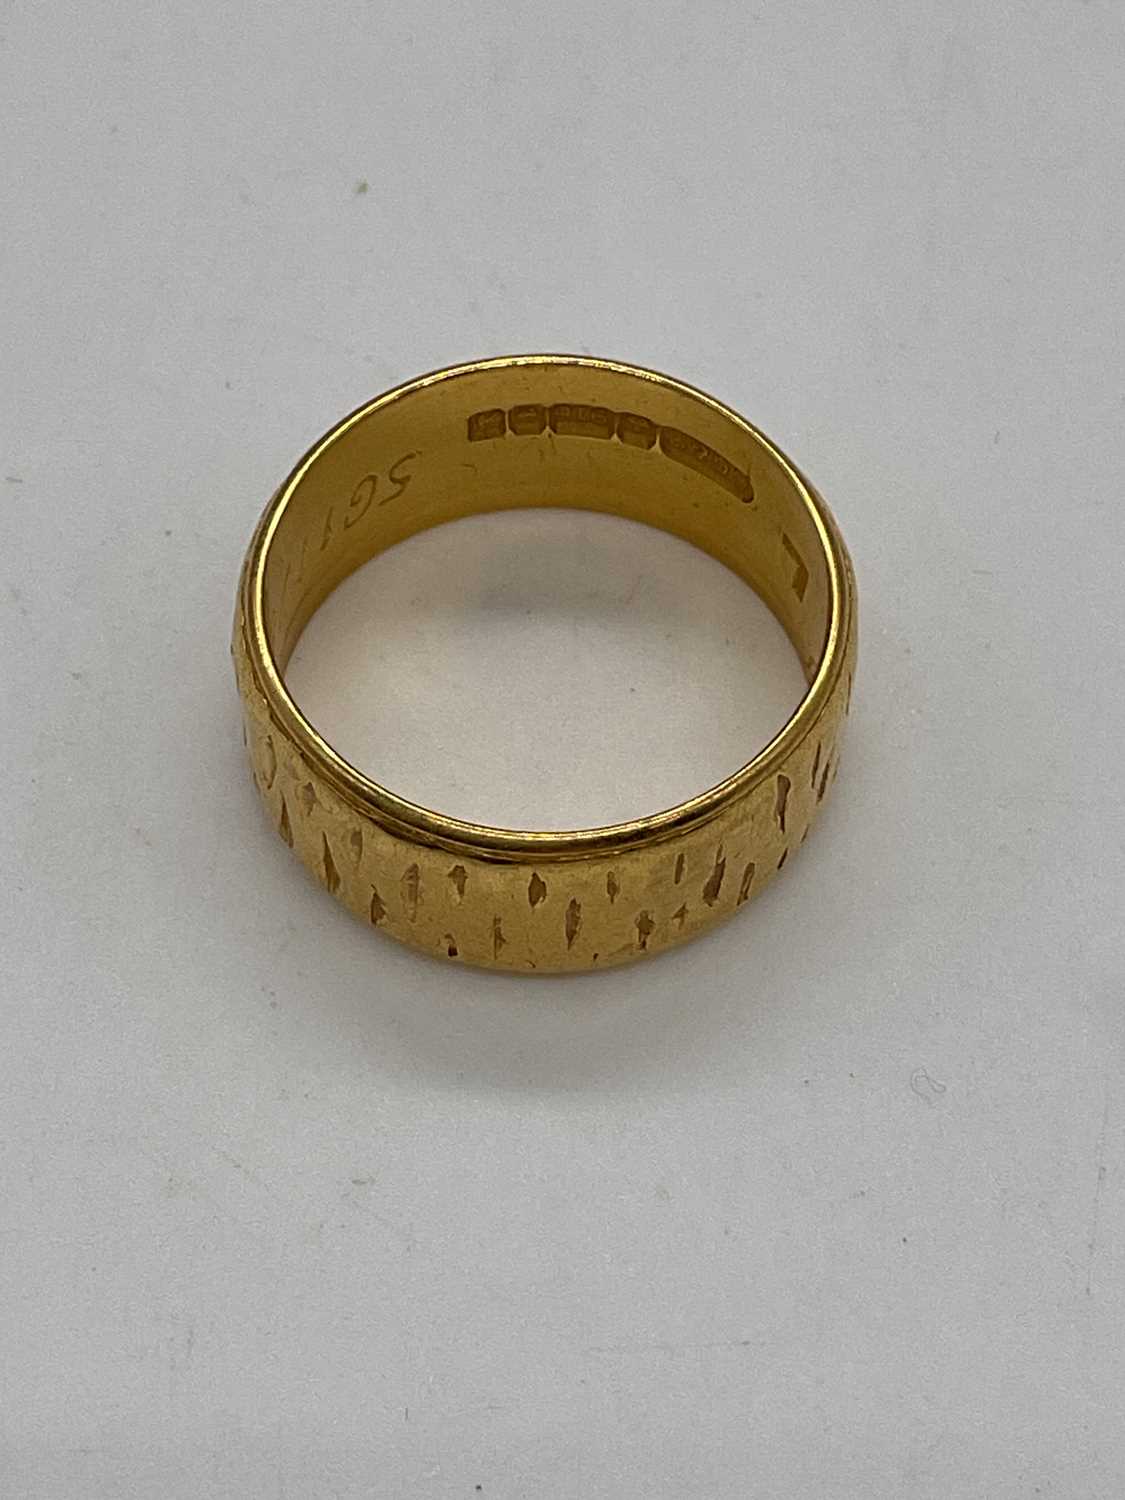 A 22ct yellow gold wedding band with engraved detail and inscription to the inner band, size K 1/ - Image 3 of 4